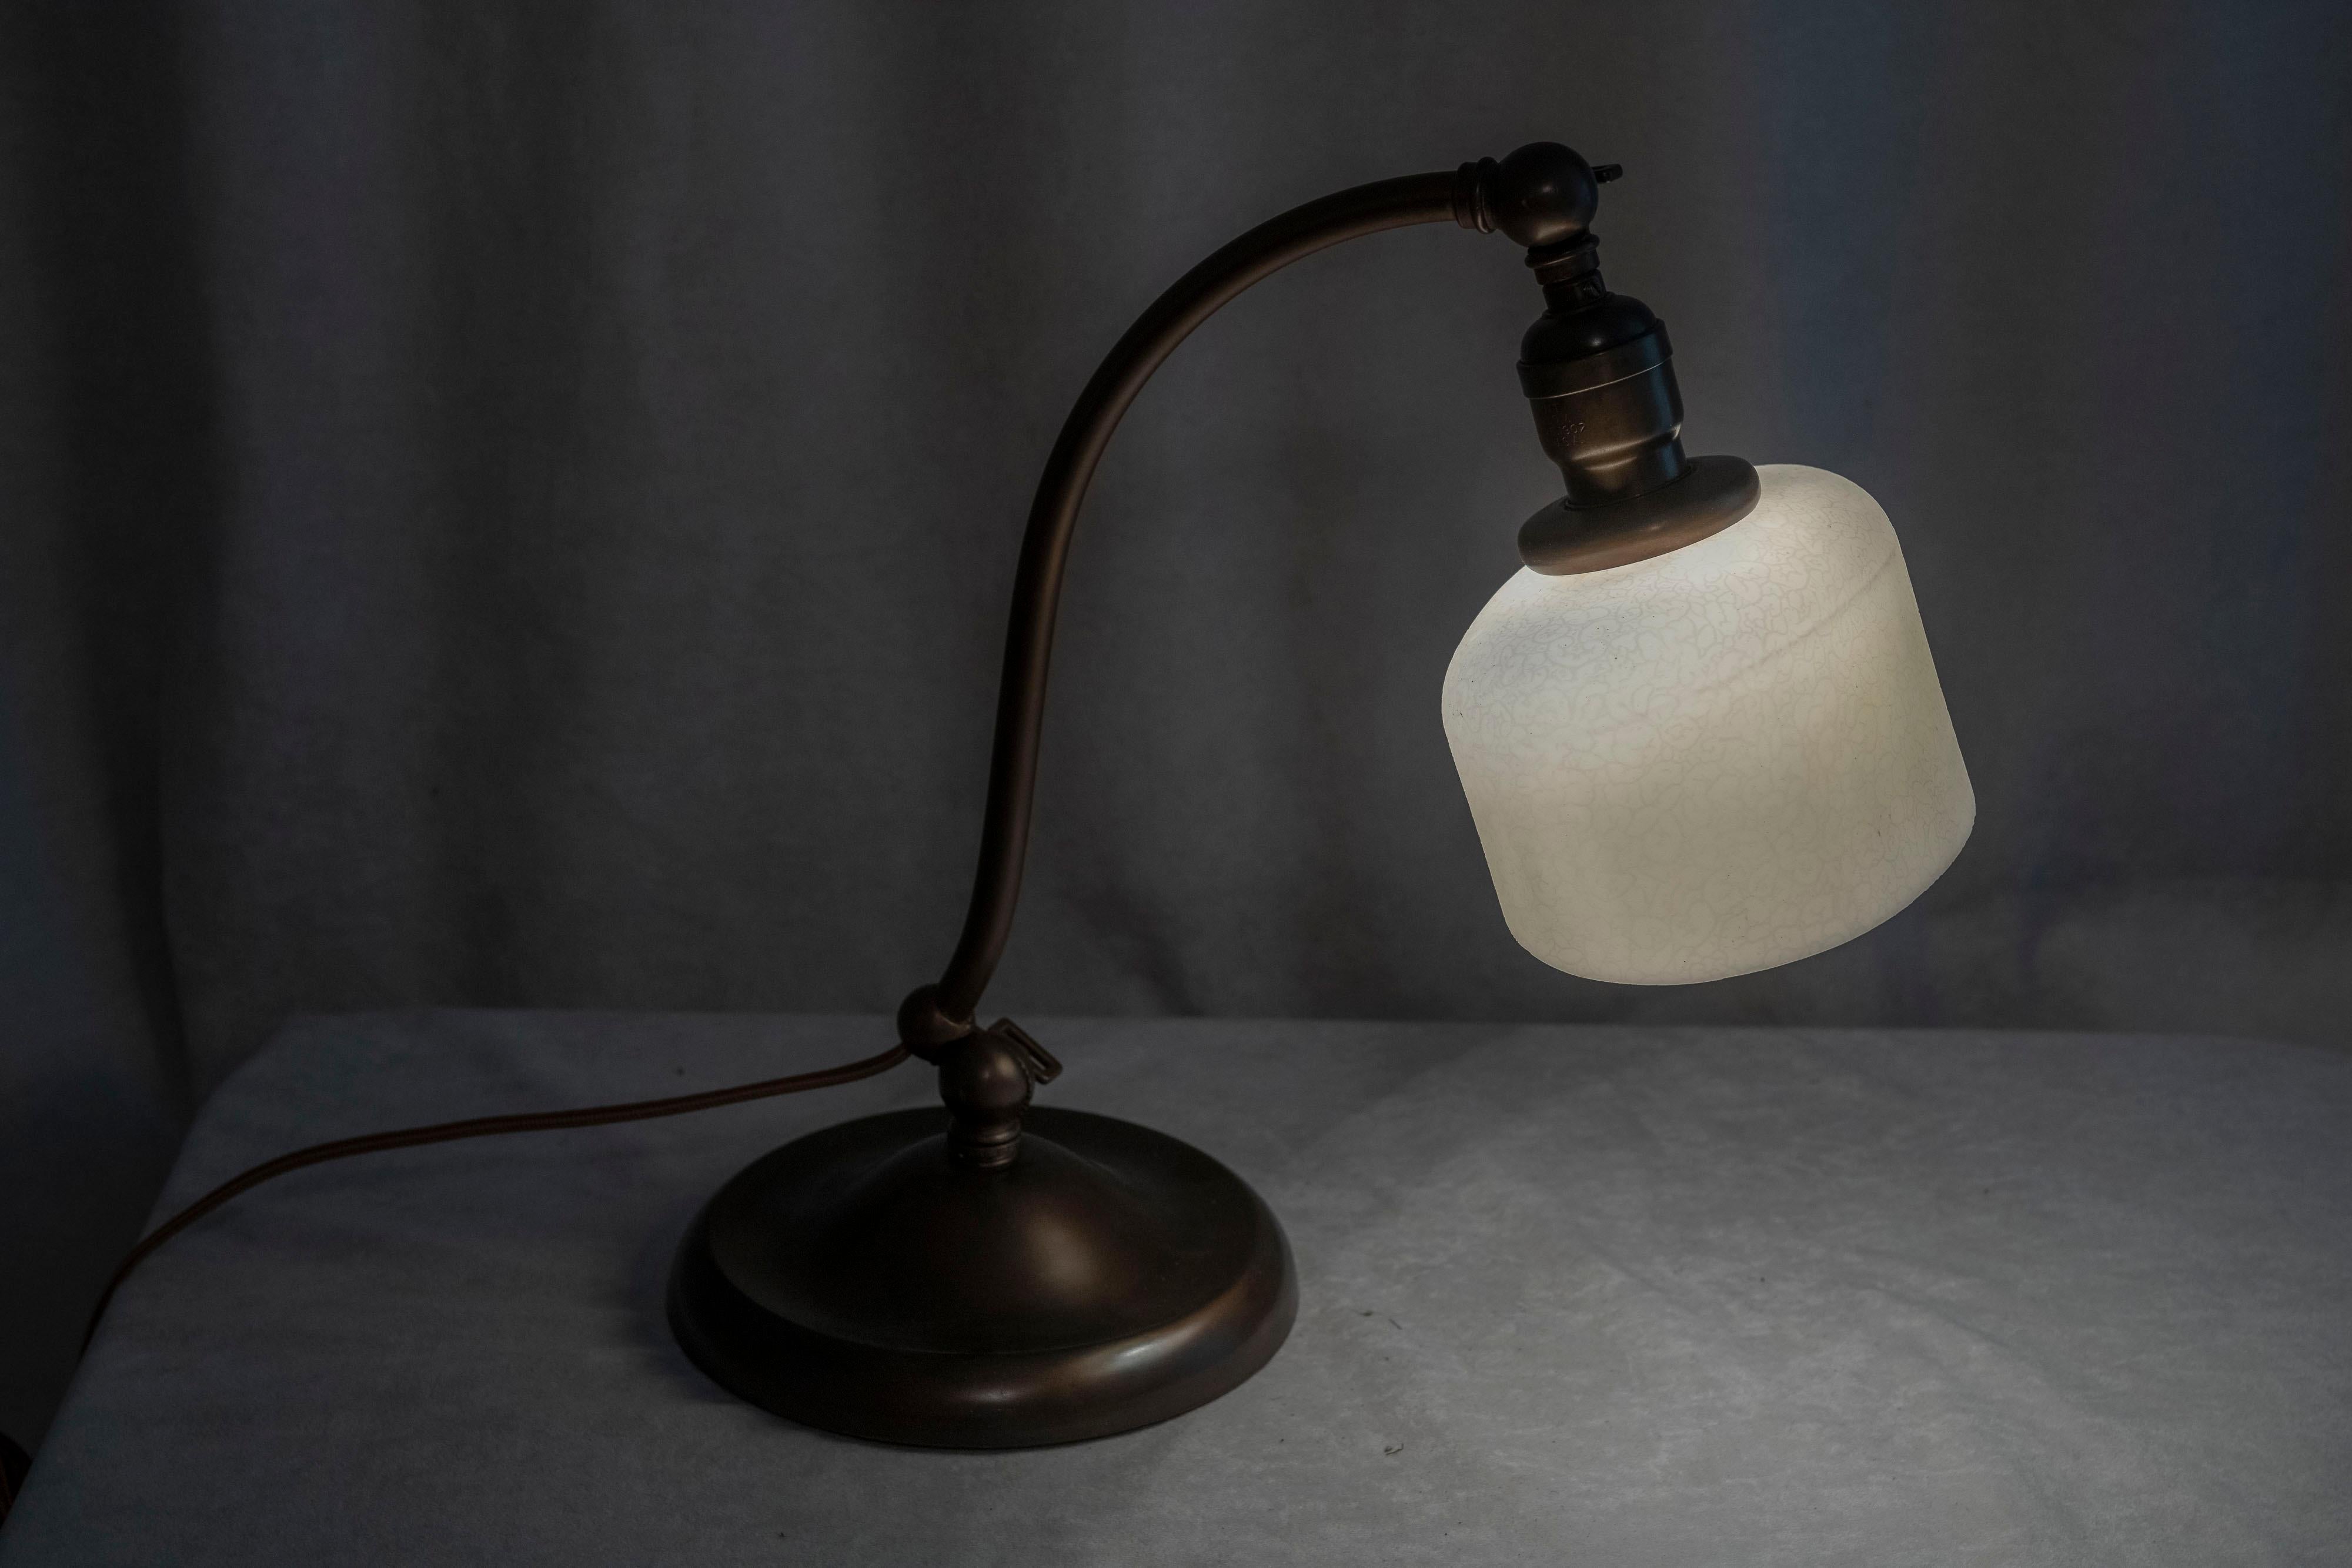 Brass Desk/Banker's Lamp w/ Double Adjustment and Art Glass Shade, ca. 1910 For Sale 1